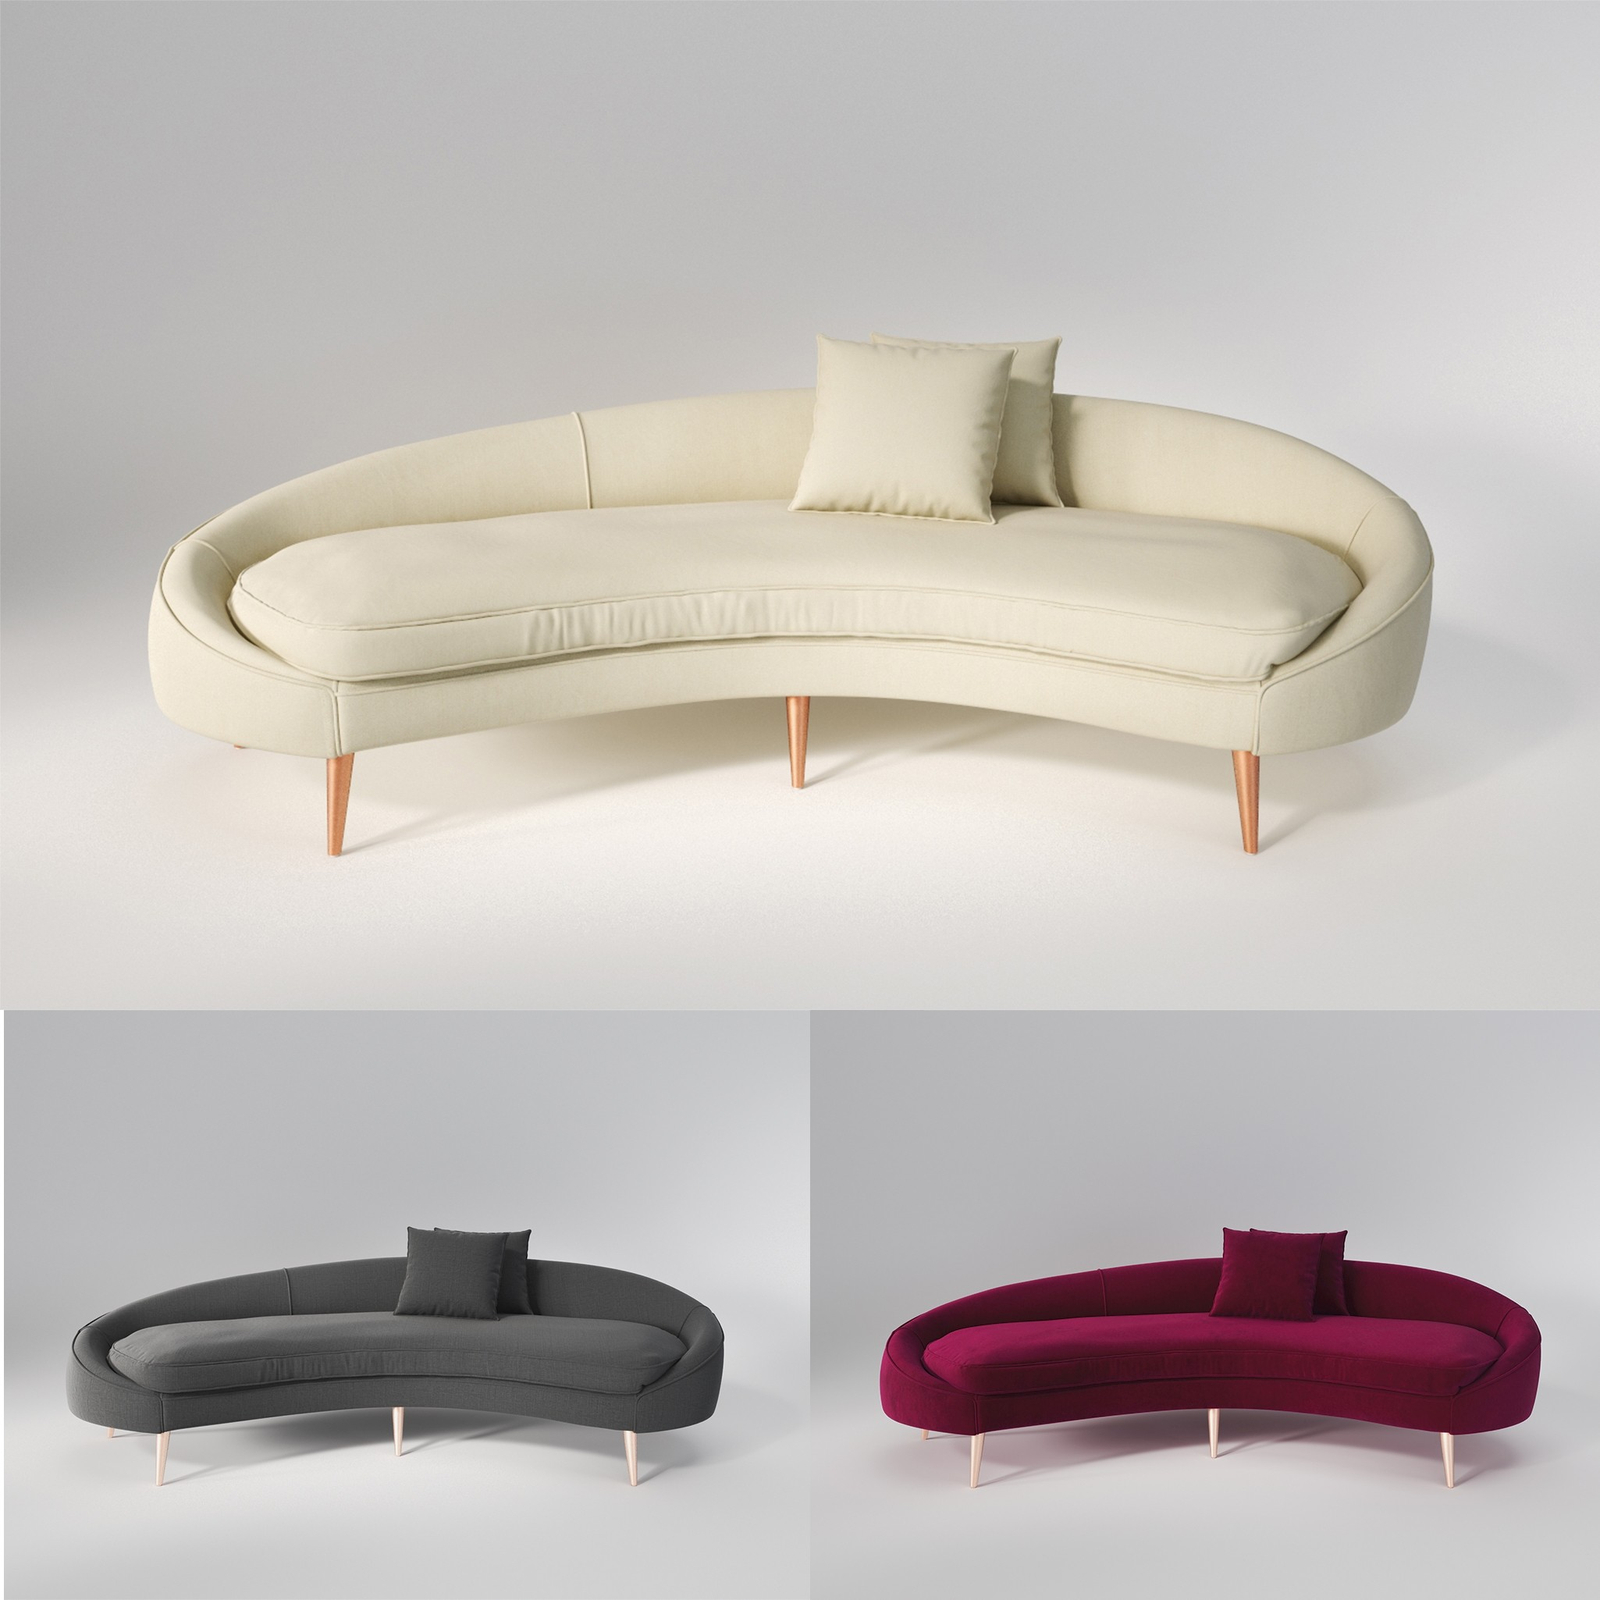 3d furniture rendering of a sofa in three colors